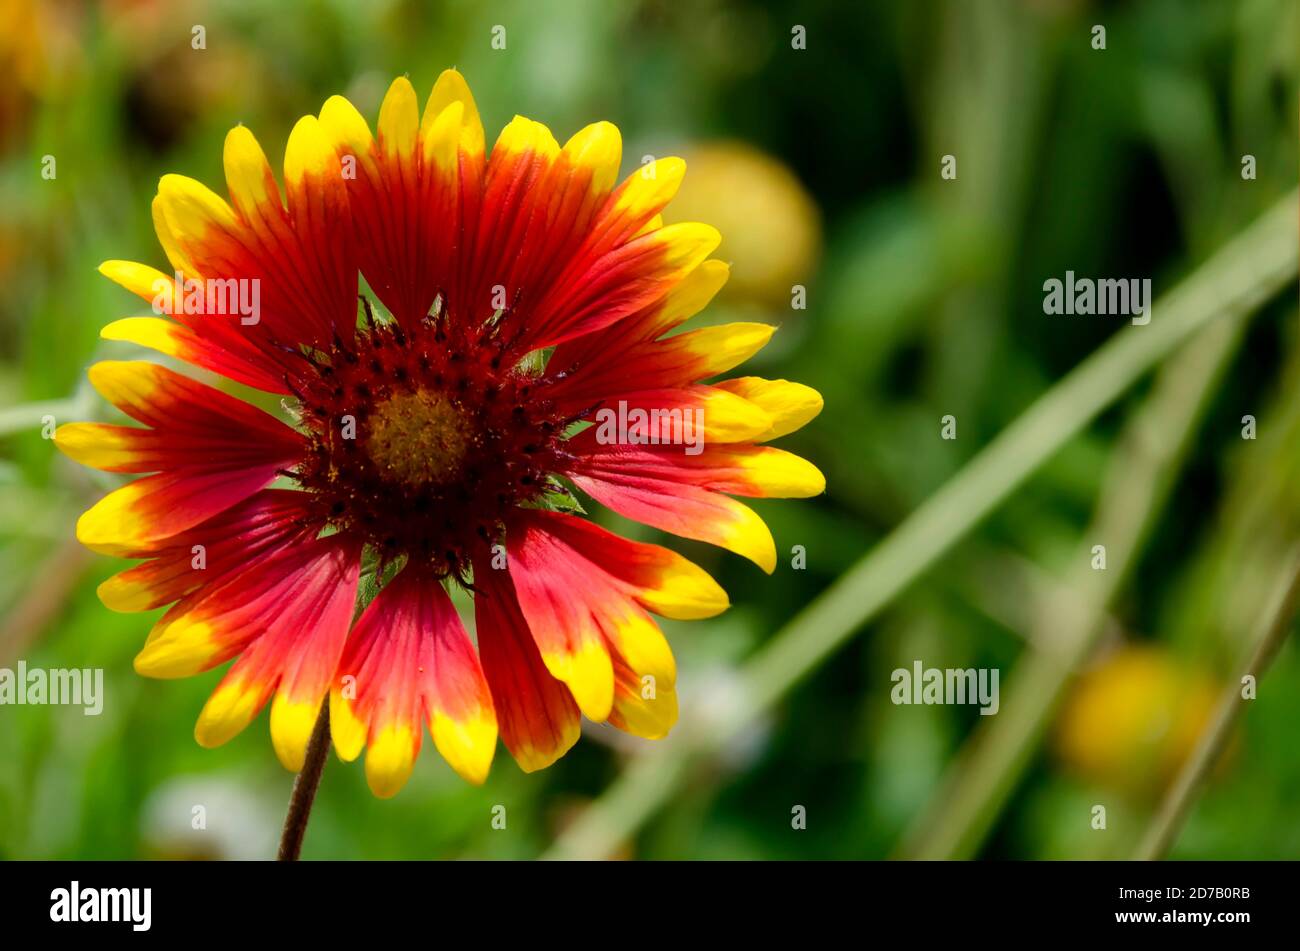 Gaillardia aristata  or Blanket flower with red and yellow petals blooming in the garden, district Drujba, Sofia, Bulgaria Stock Photo